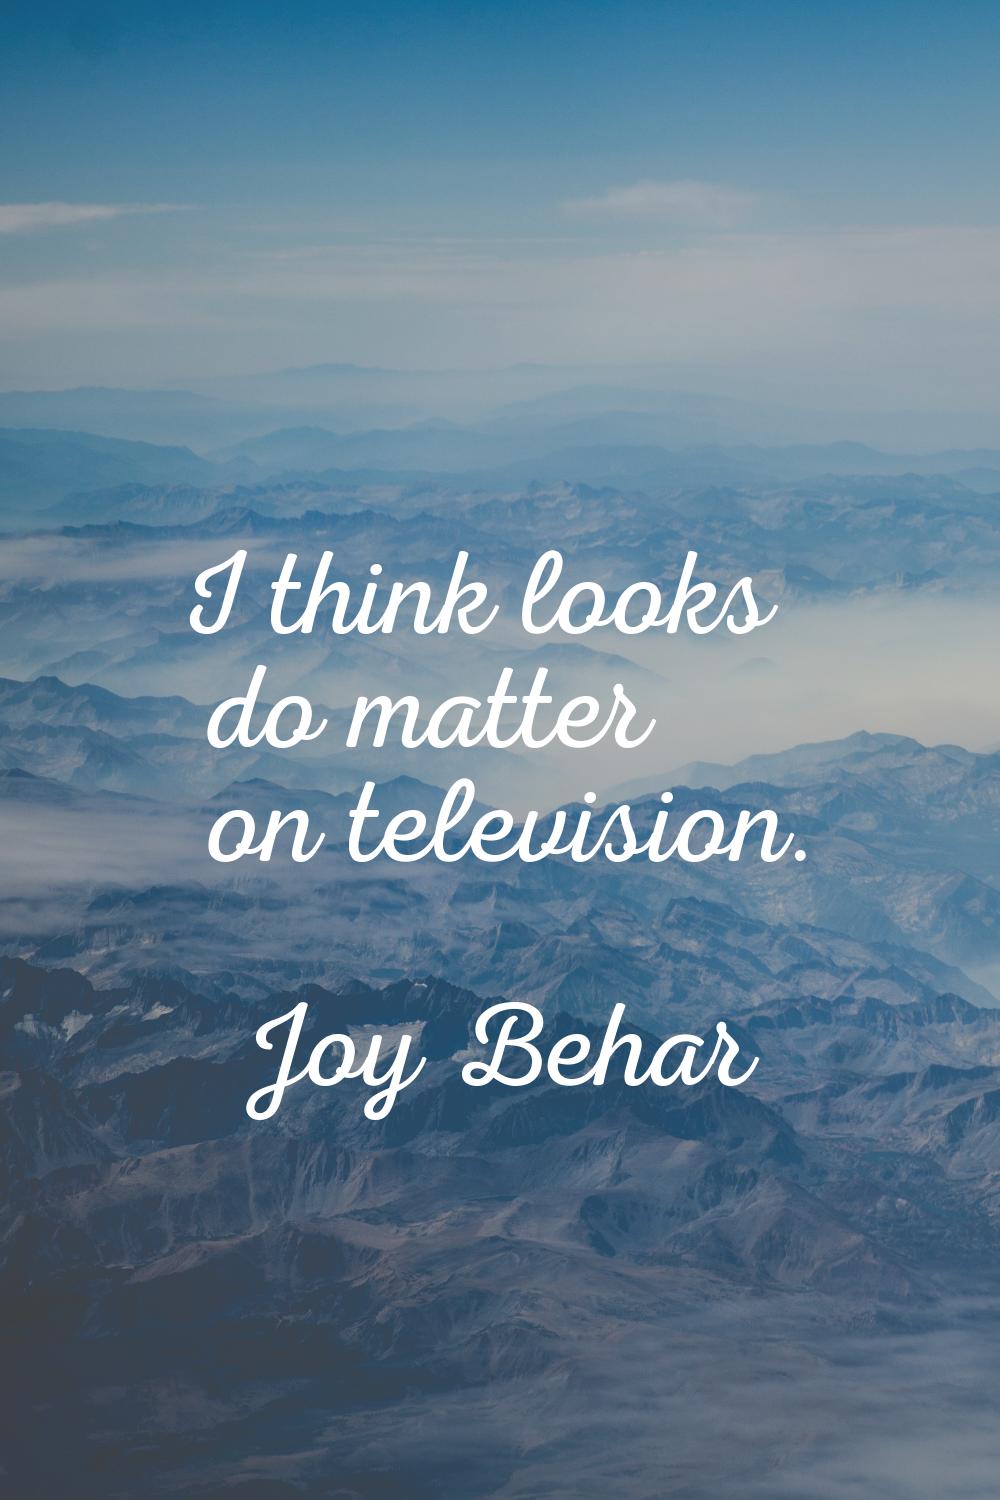 I think looks do matter on television.